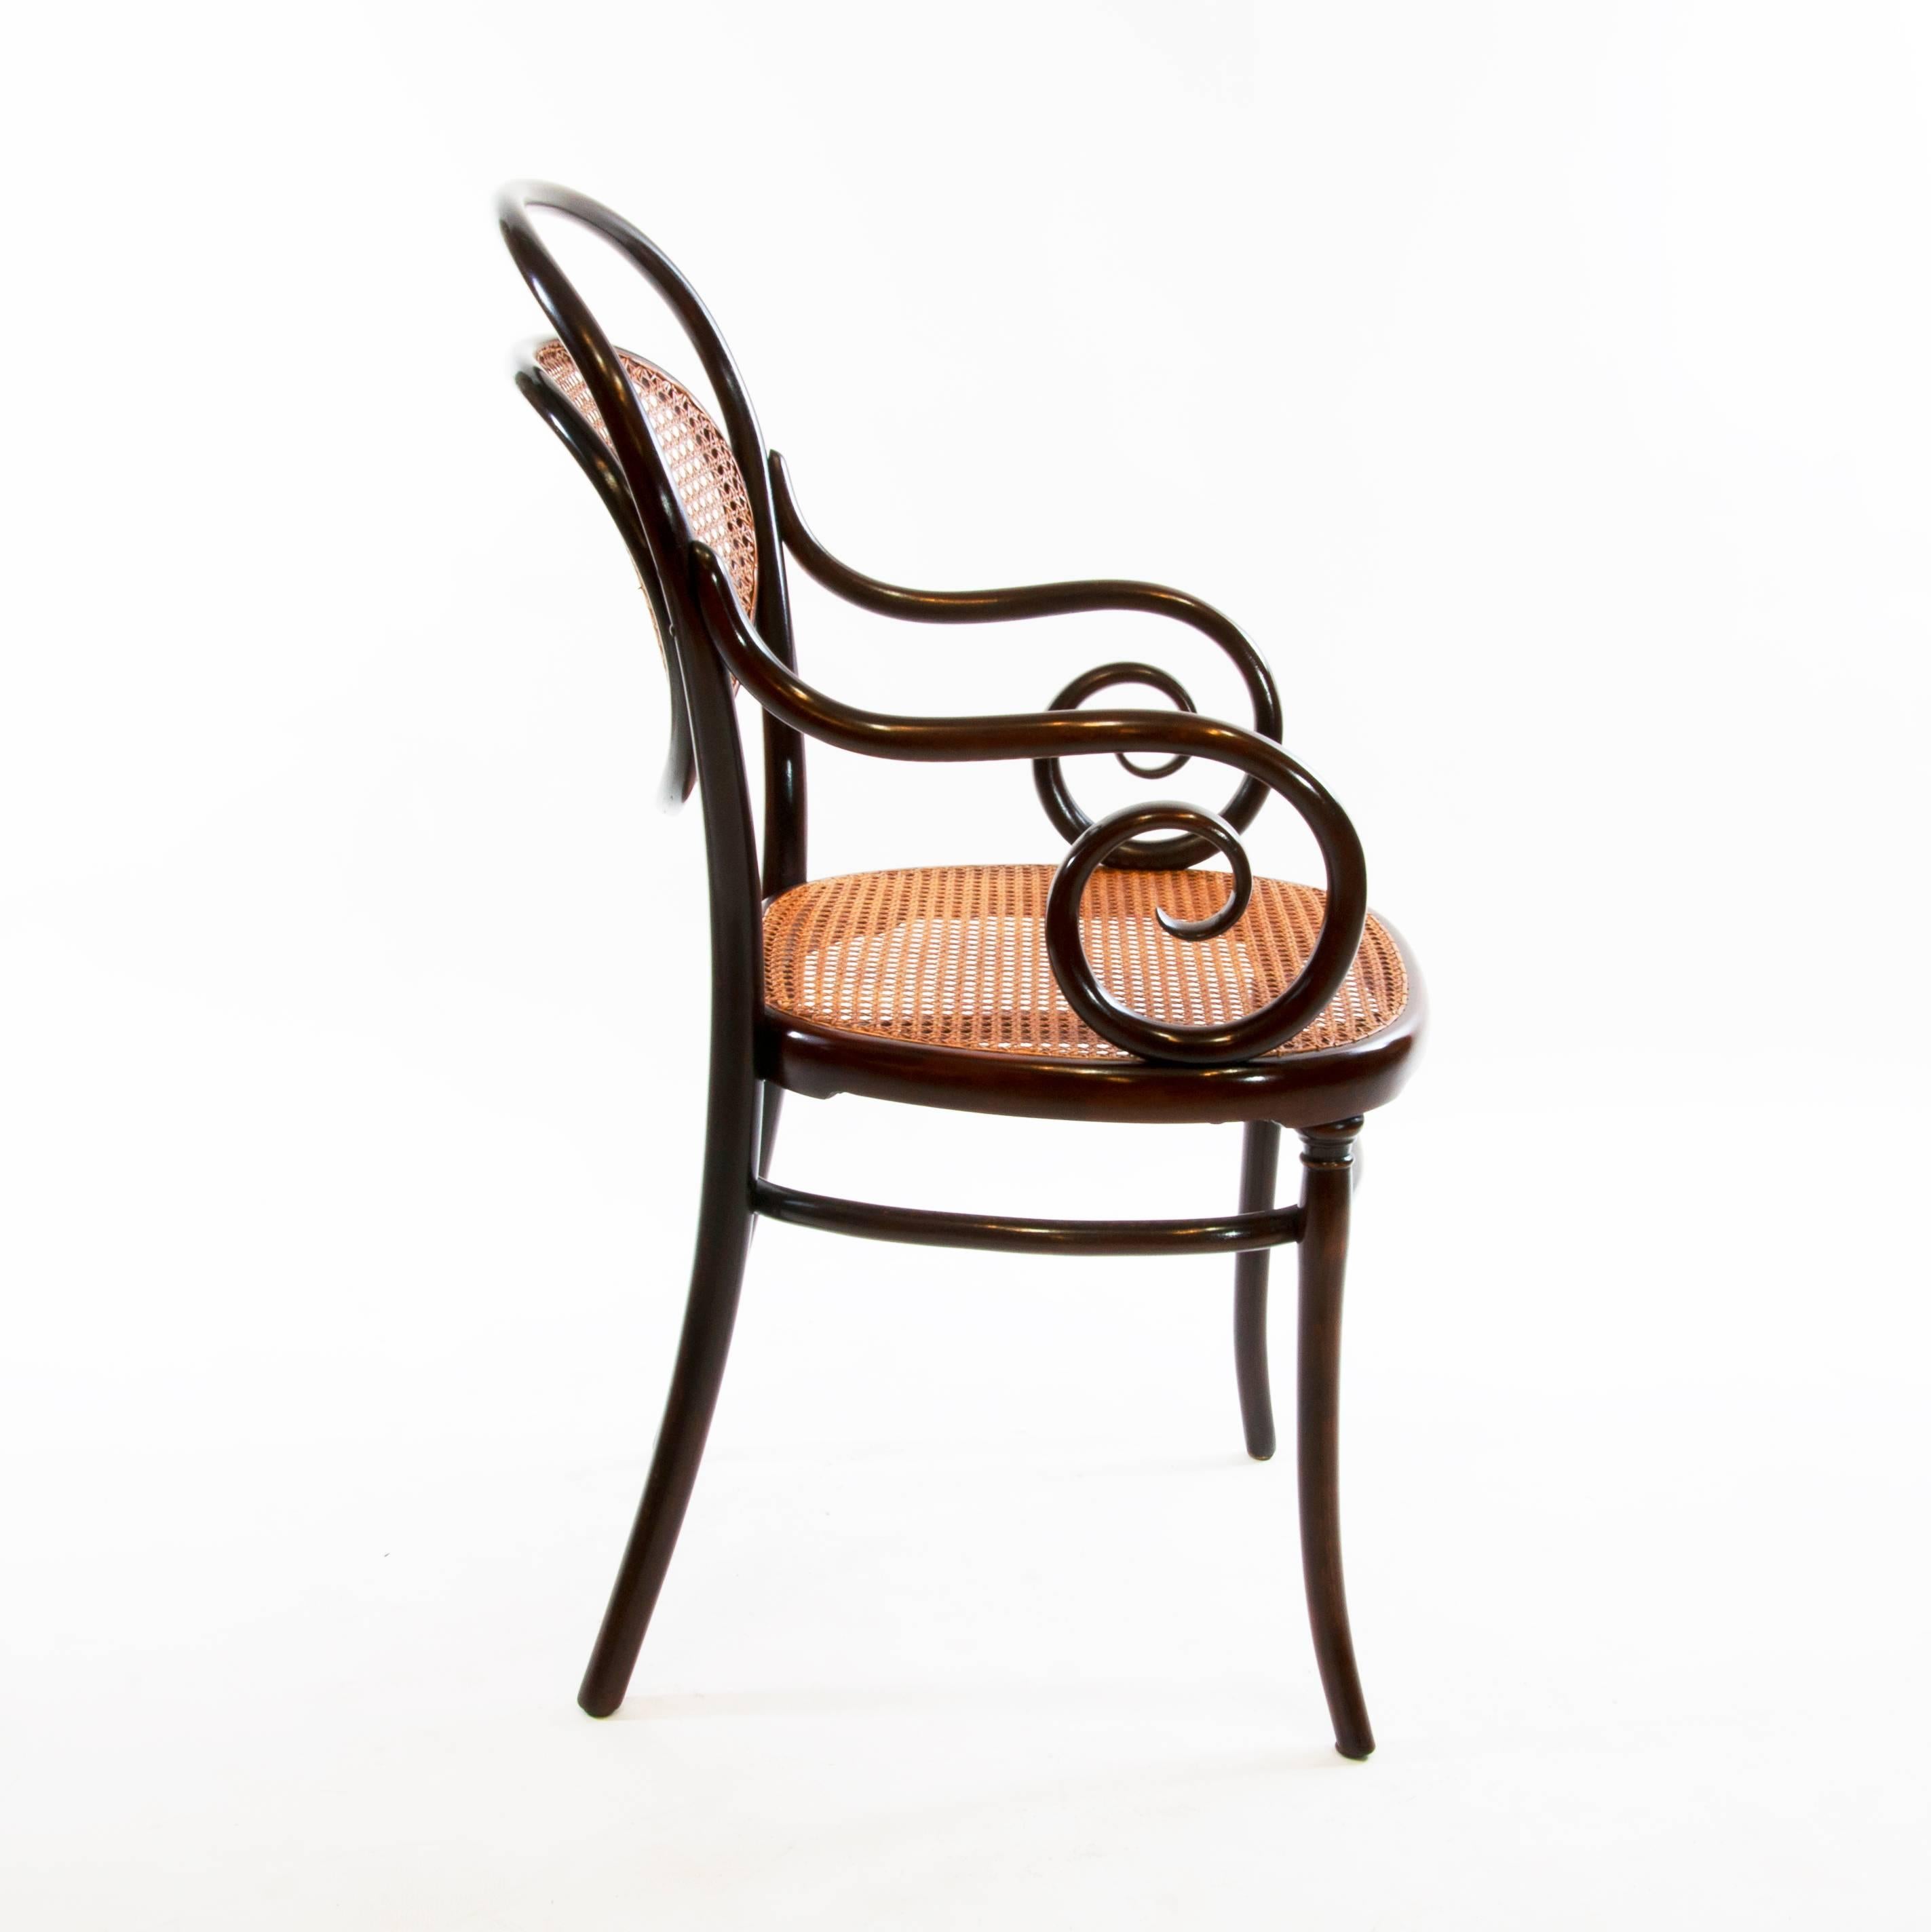 Antique Thonet Bentwood Armchair Fauteuil No. 11 In Excellent Condition For Sale In Vienna, AT